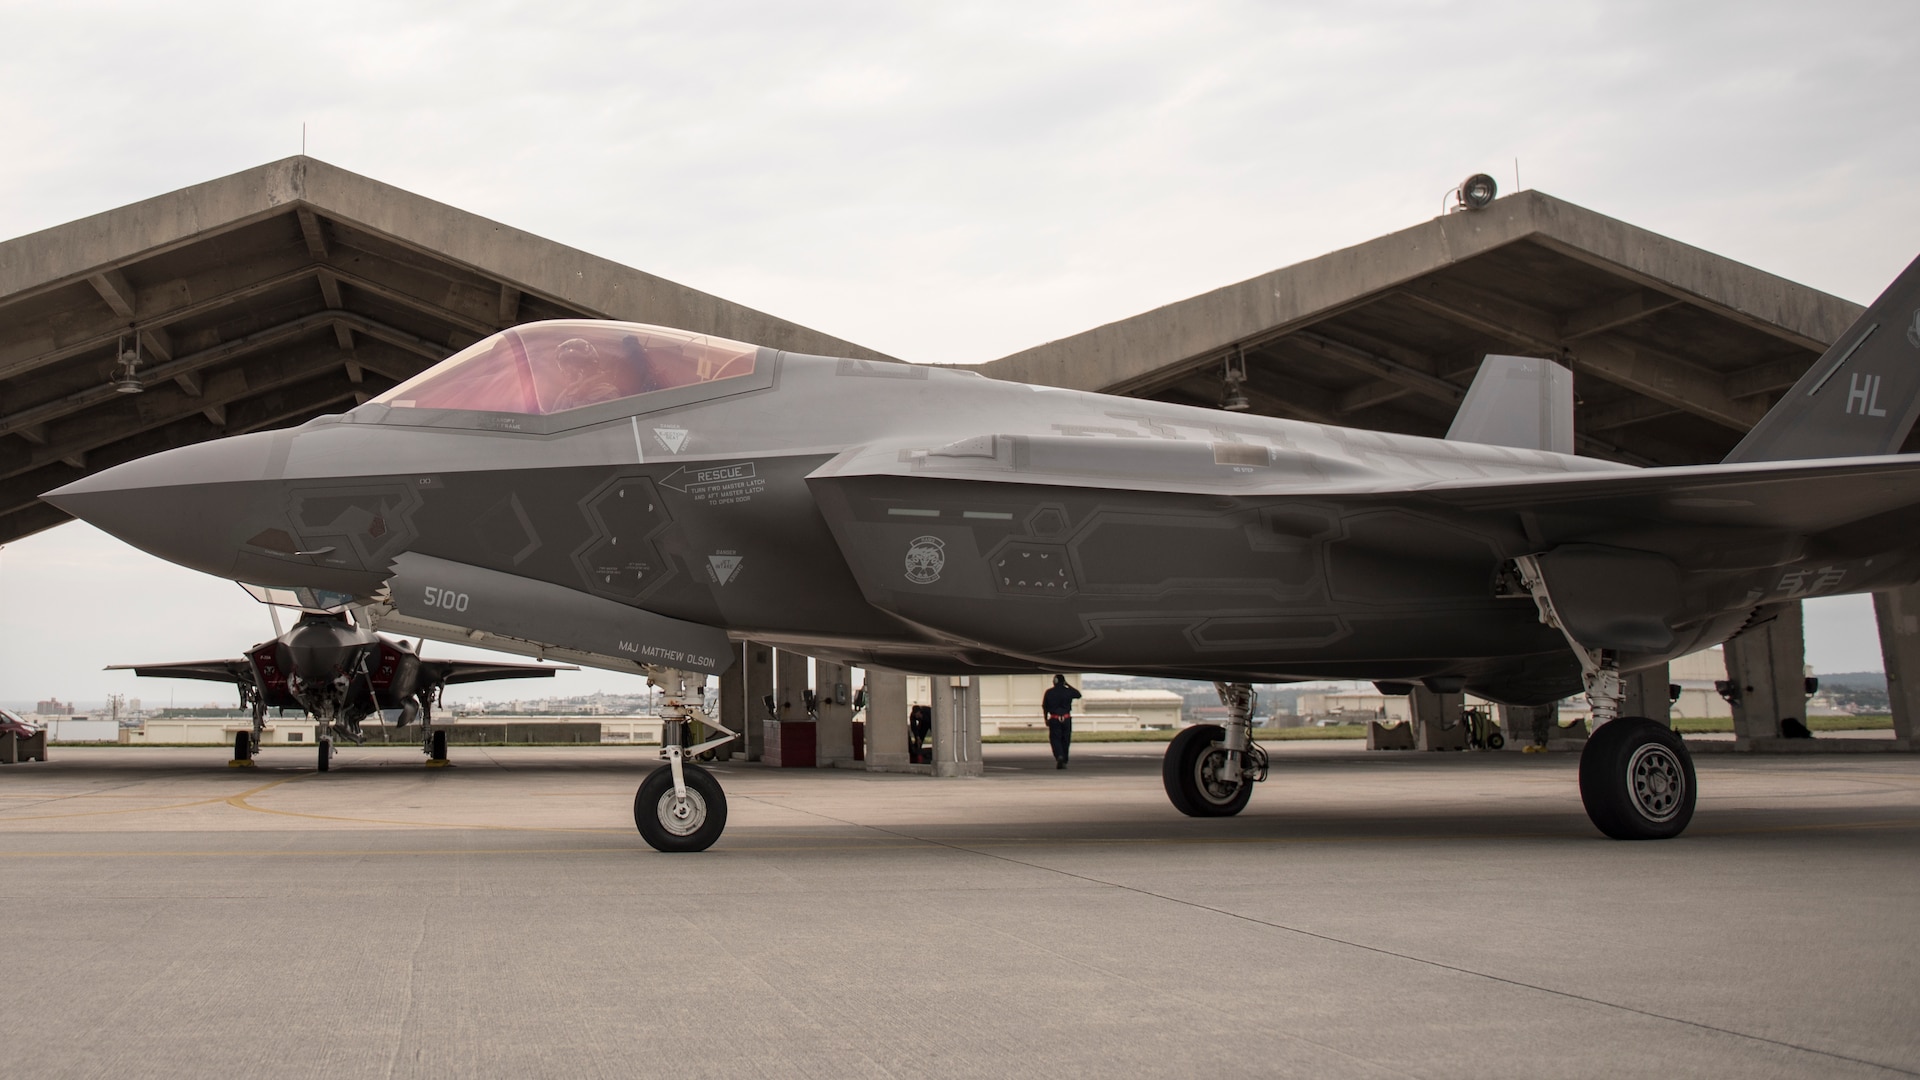 A U.S. Air Force F-35A Lightning II from Hill Air Force Base, Utah, taxis for take-off Nov. 16, 2017, at Kadena Air Base, Japan. The F-35A is being deployed under U.S. PACOM’s theater security package (TSP) program, which has been in operation since 2004. This long-planned deployment is designed to demonstrate the continuing U.S. commitment to stability and security in the region.